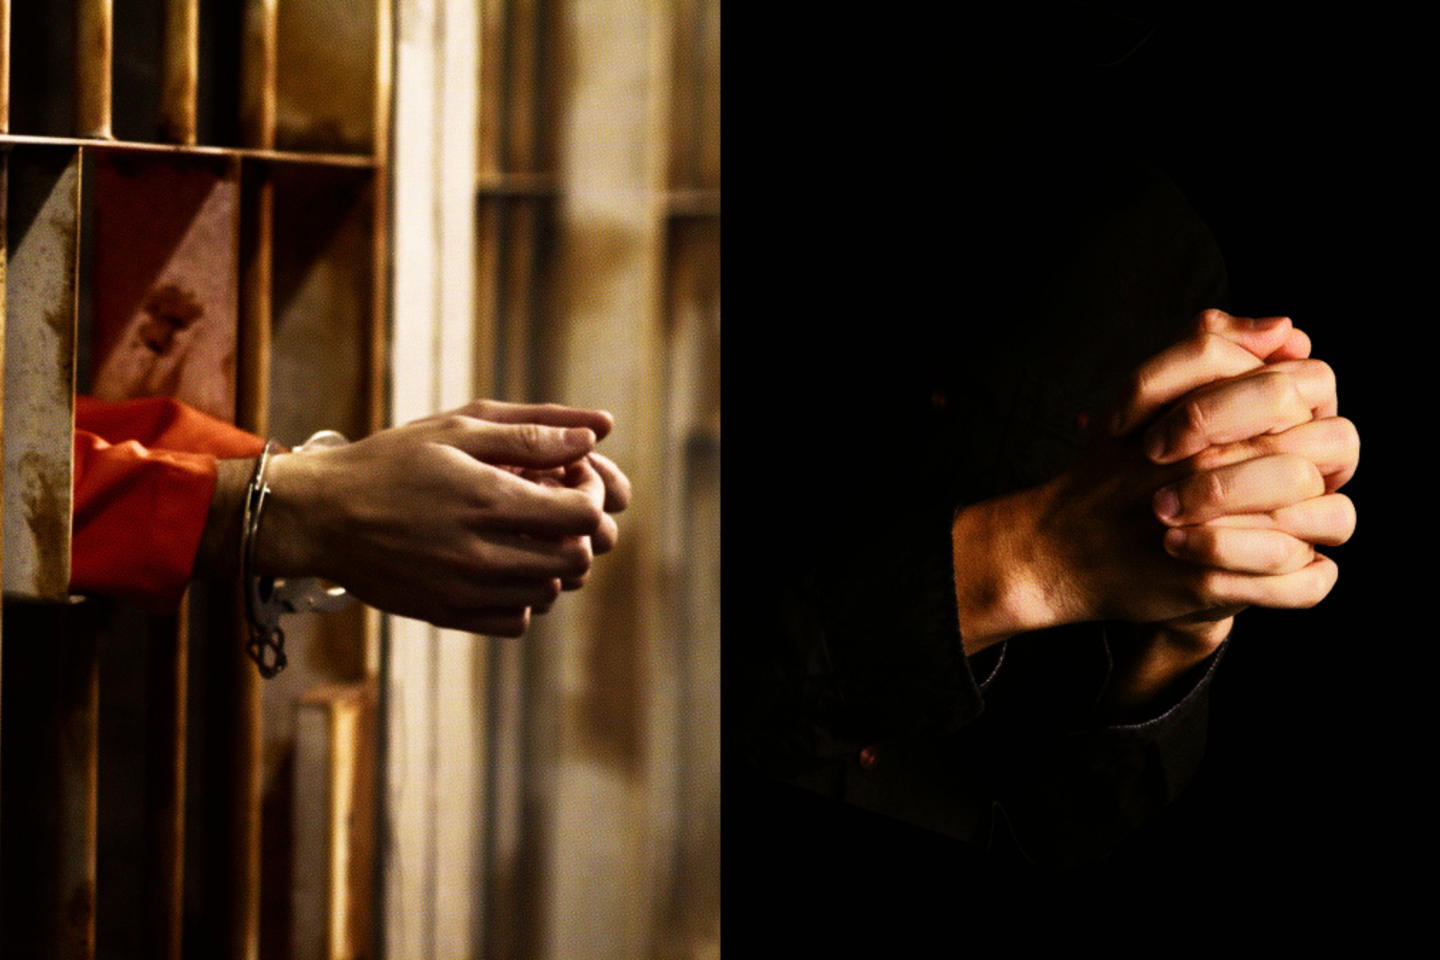 A split image showing a prisoner's hands in cuffs on the left and a person's hands clasped in prayer on the right